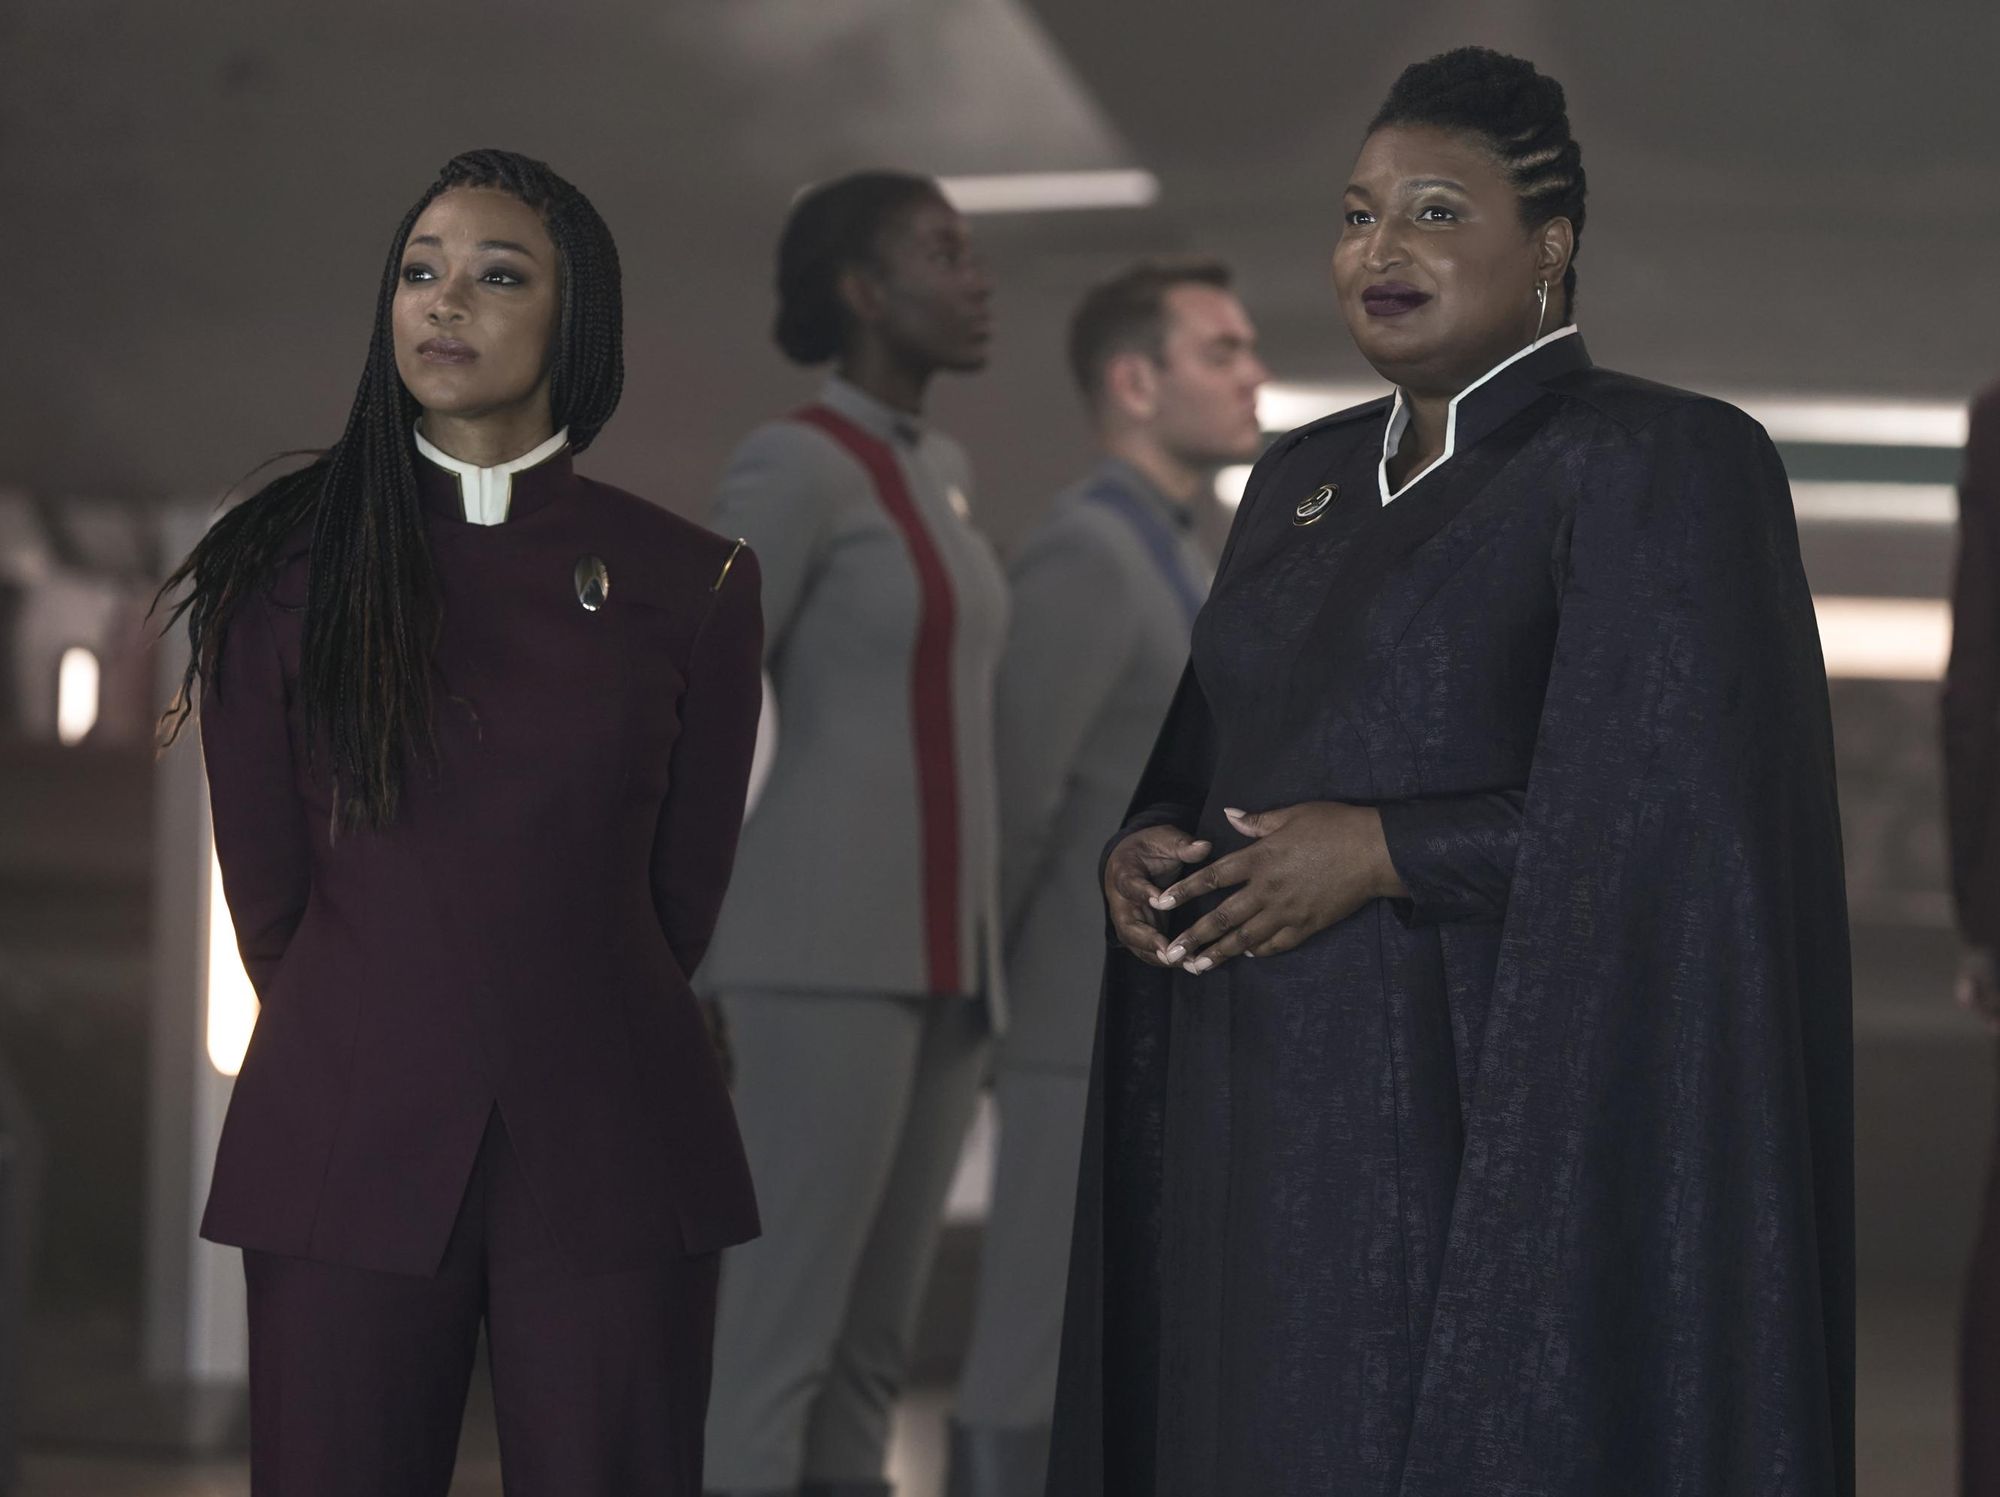 Stacey Abrams in long black robes stands next to Sonequa-Martin Geren in a purple uniform.